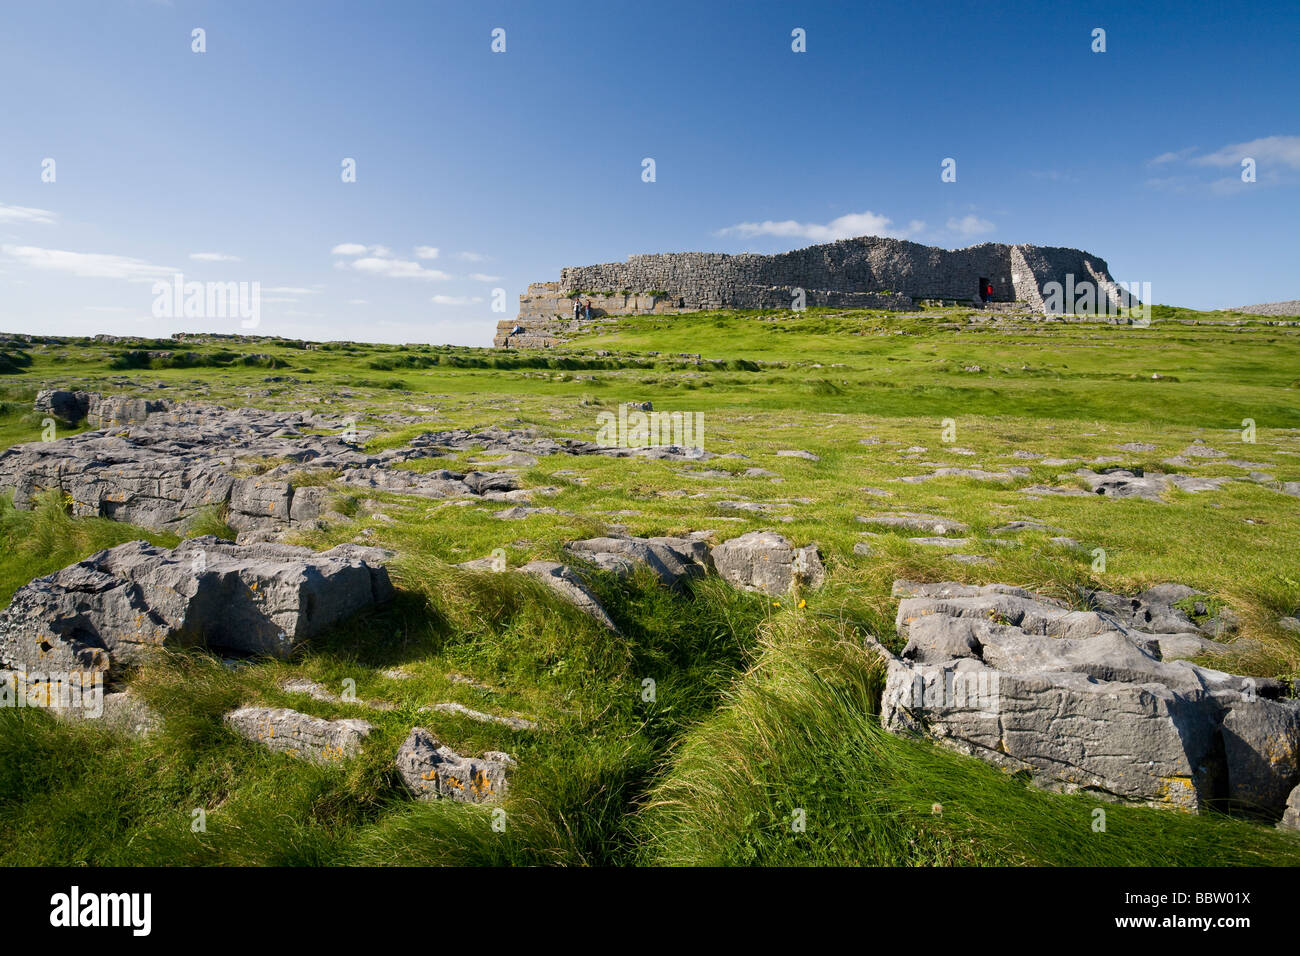 The fort at Dun Angus. The ancient fort on Innishmore with the green grass and rocks from which it was hewn in the foreground. Stock Photo